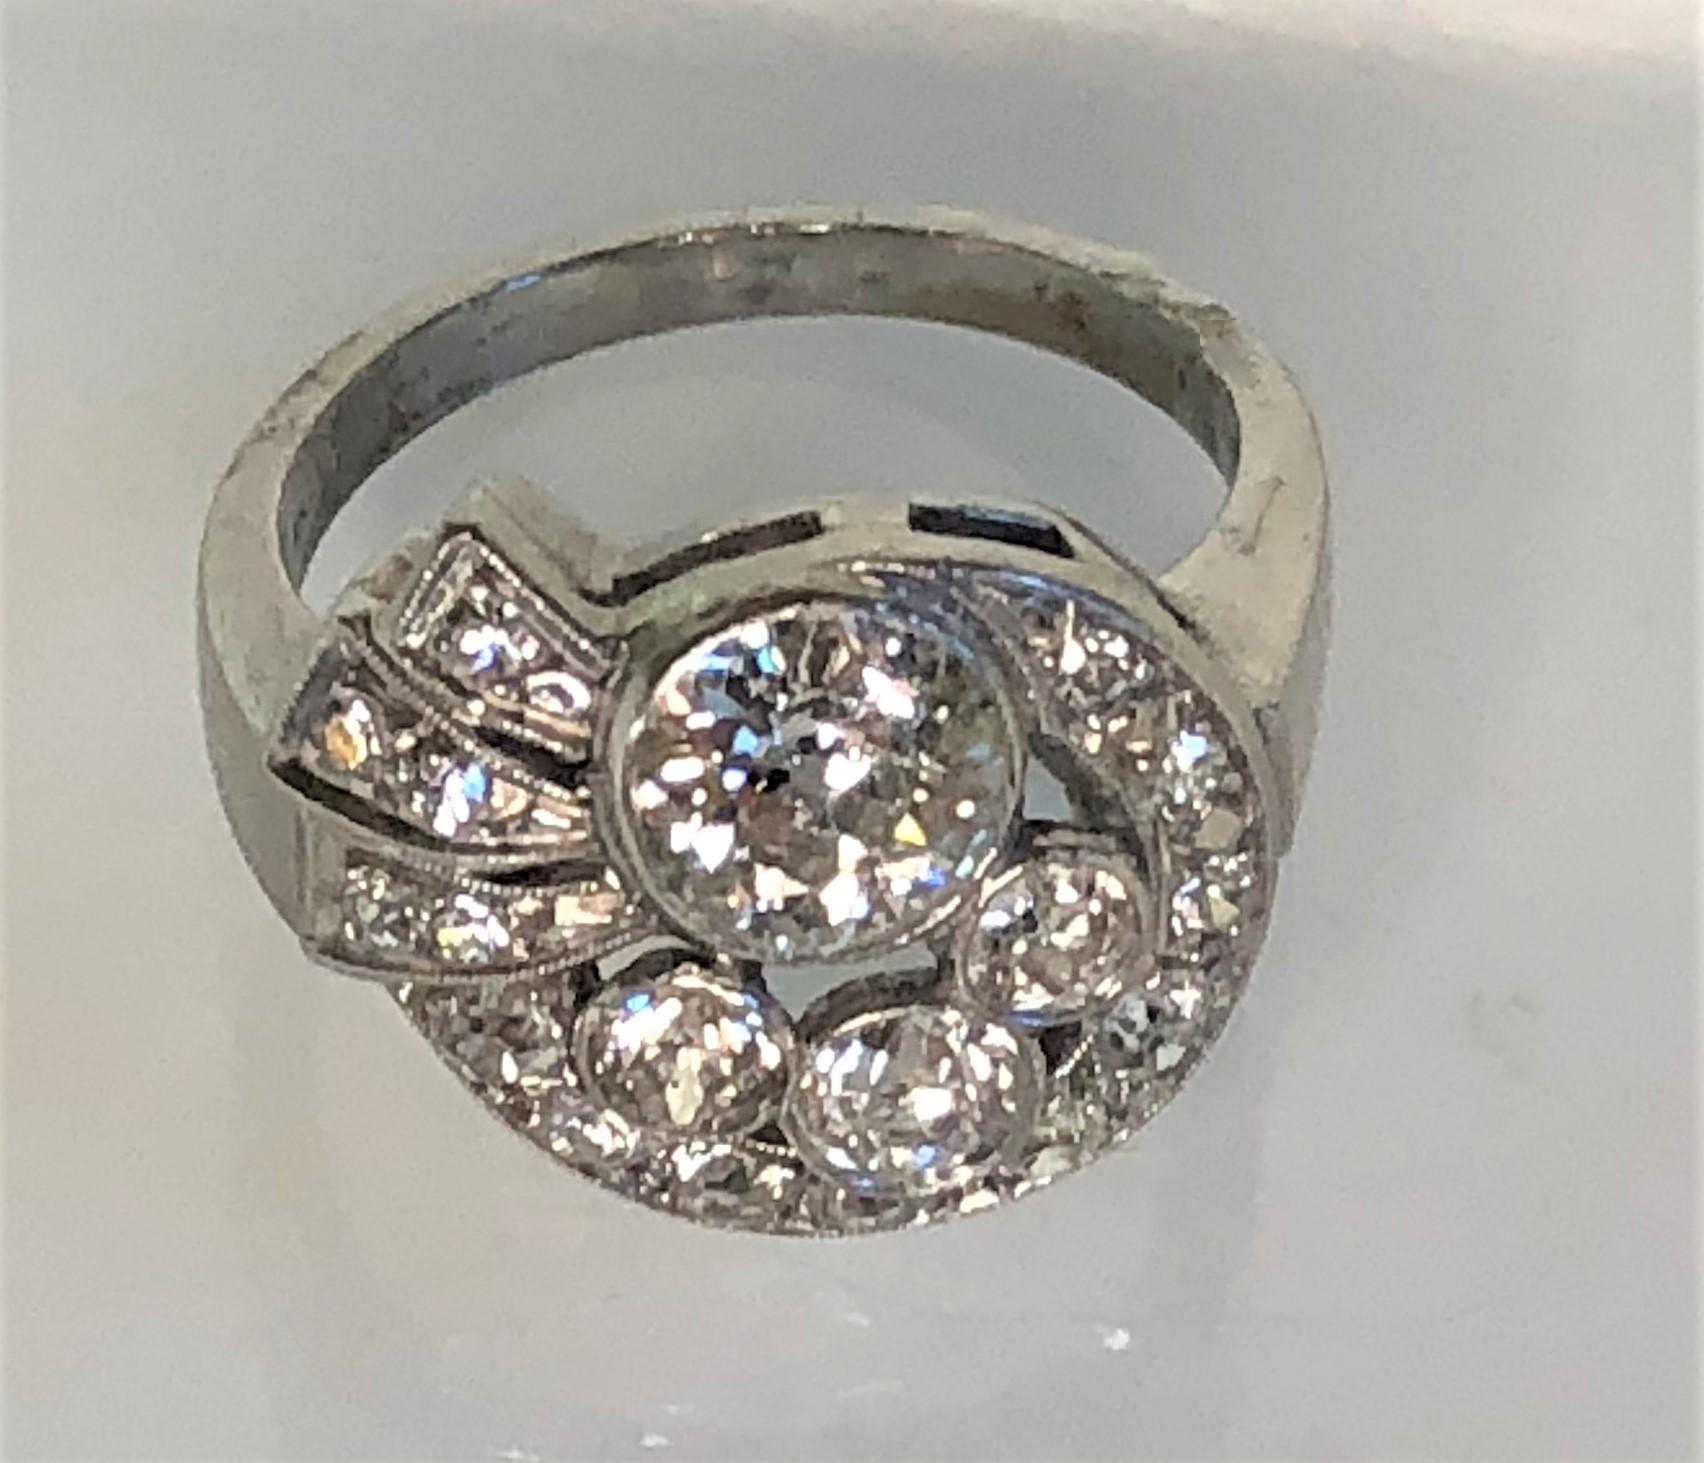 This special ring will grab attention!  Beautiful sparkly diamonds.
Platinum swirl design with lots of detail!
18 total diamonds, approximately 1.25 total diamond weight
Center diamond approximately .75 ct
Other diamonds approximately .005 to .20 ct